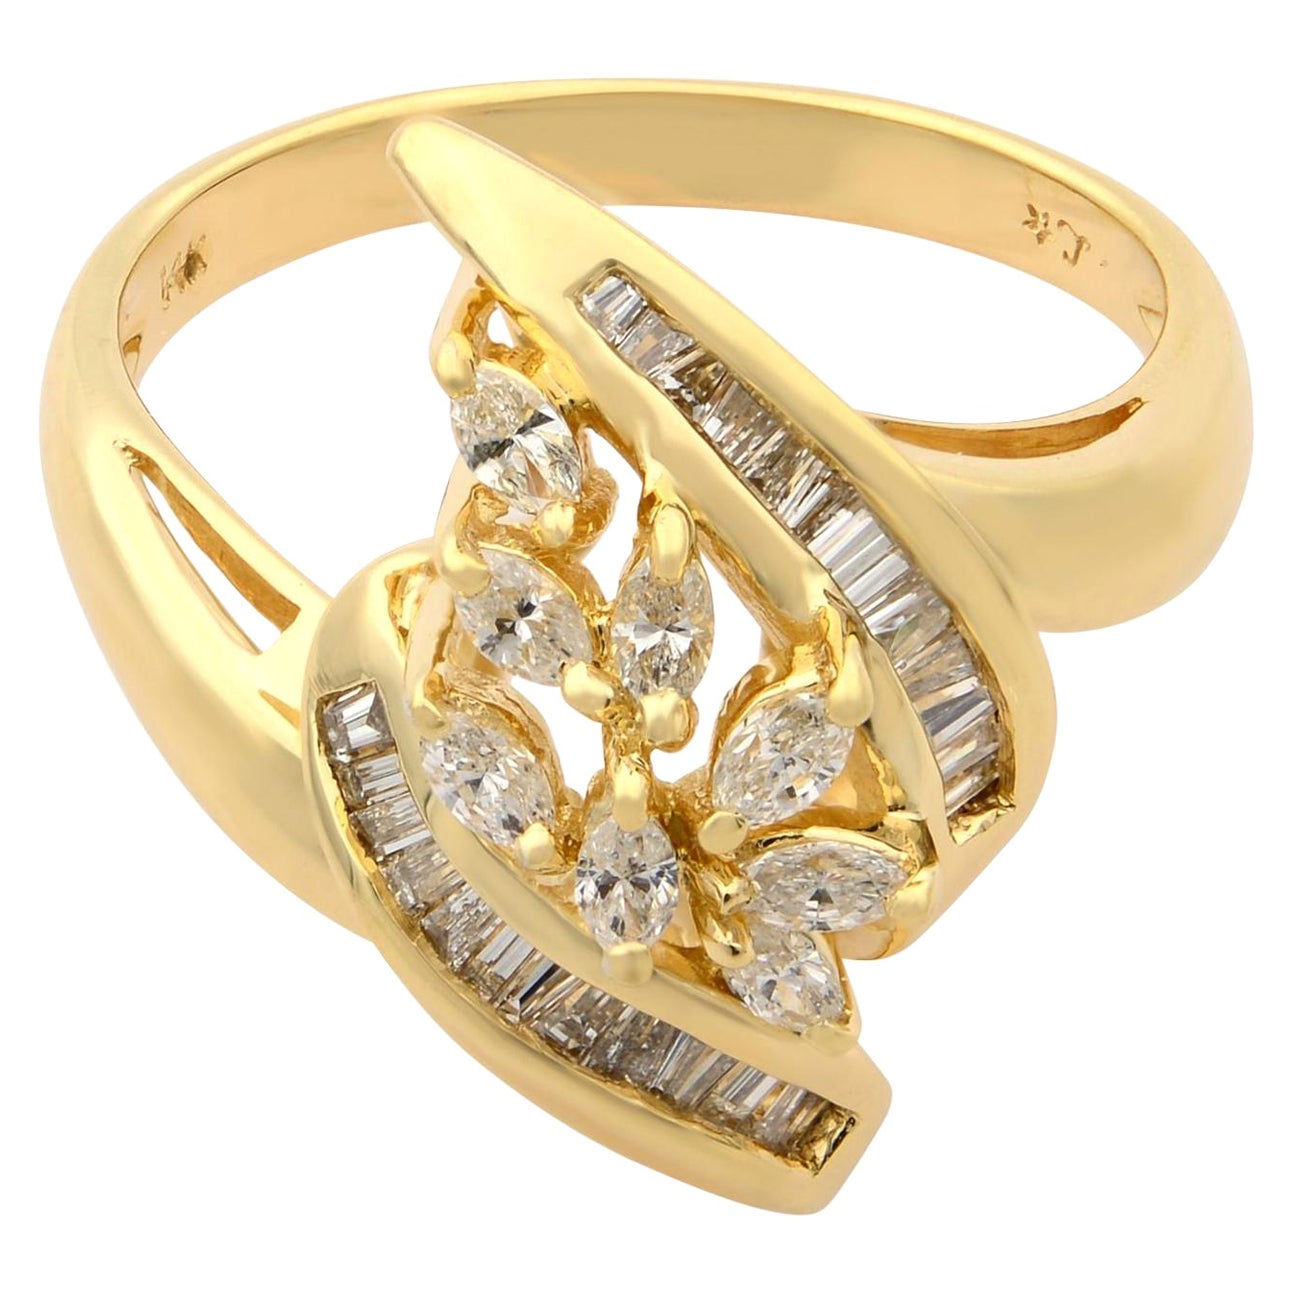 Rachel Koen 14K Yellow Gold Marquise and Baguette Diamonds Cocktail Ring 0.75cts